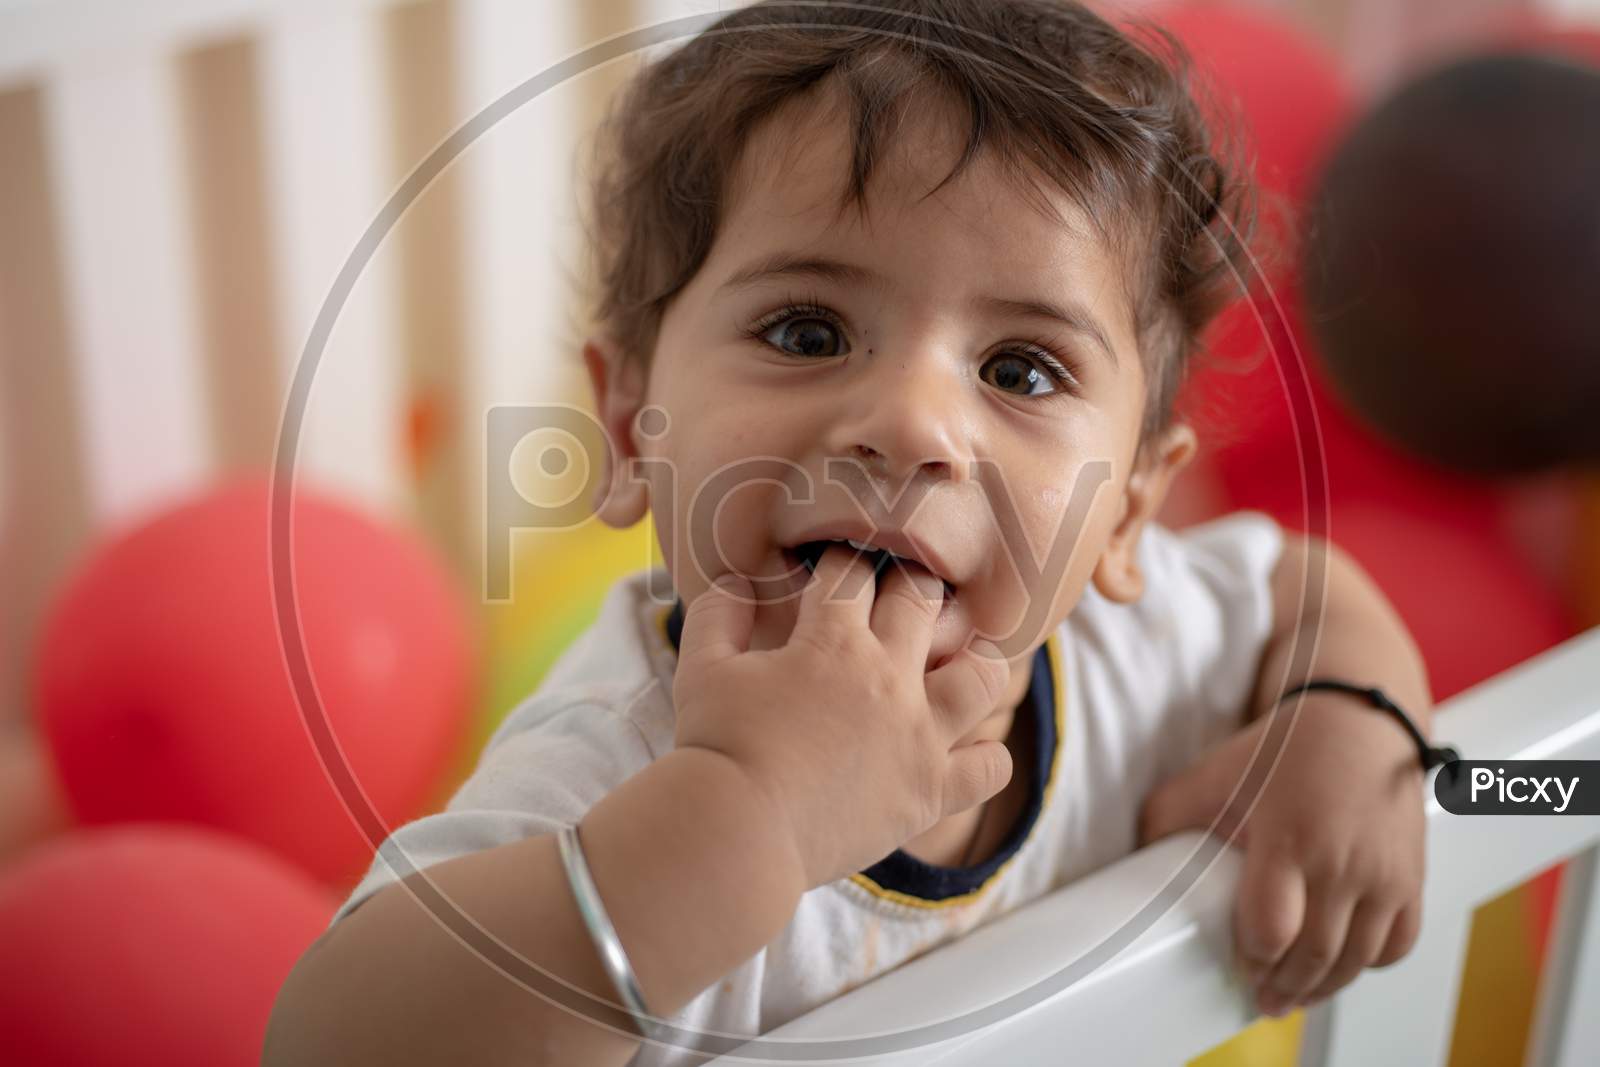 Adorable Cute Little Girl Child Playing in a Swing With Balloons And Toys In a House